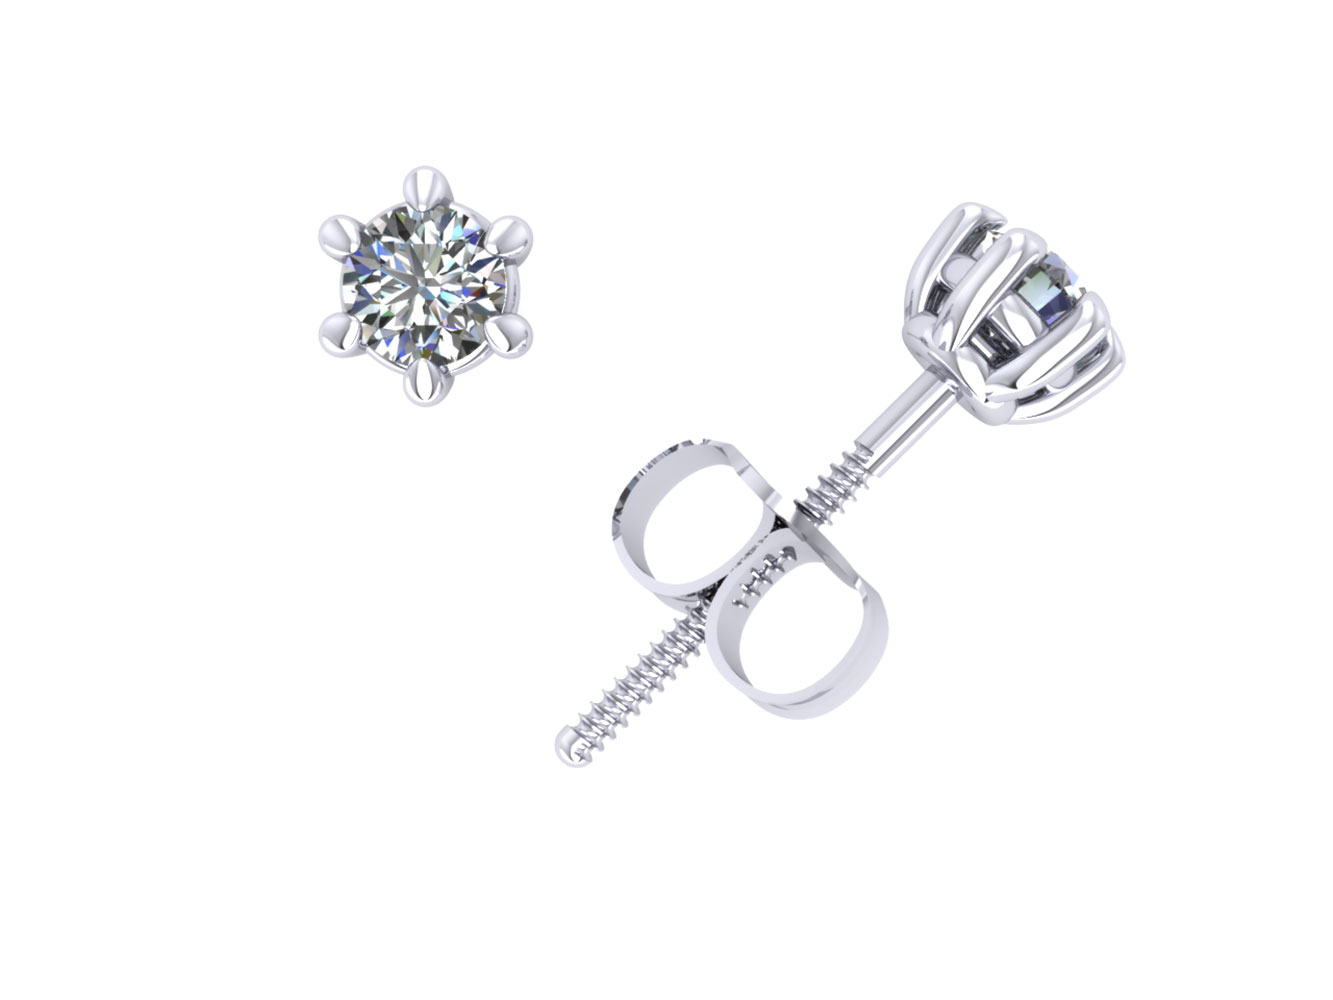 Jewel We Sell 0.25Ct Round Diamond Basket Stud Earrings 14k White or Yellow Gold Prong Setting H SI2